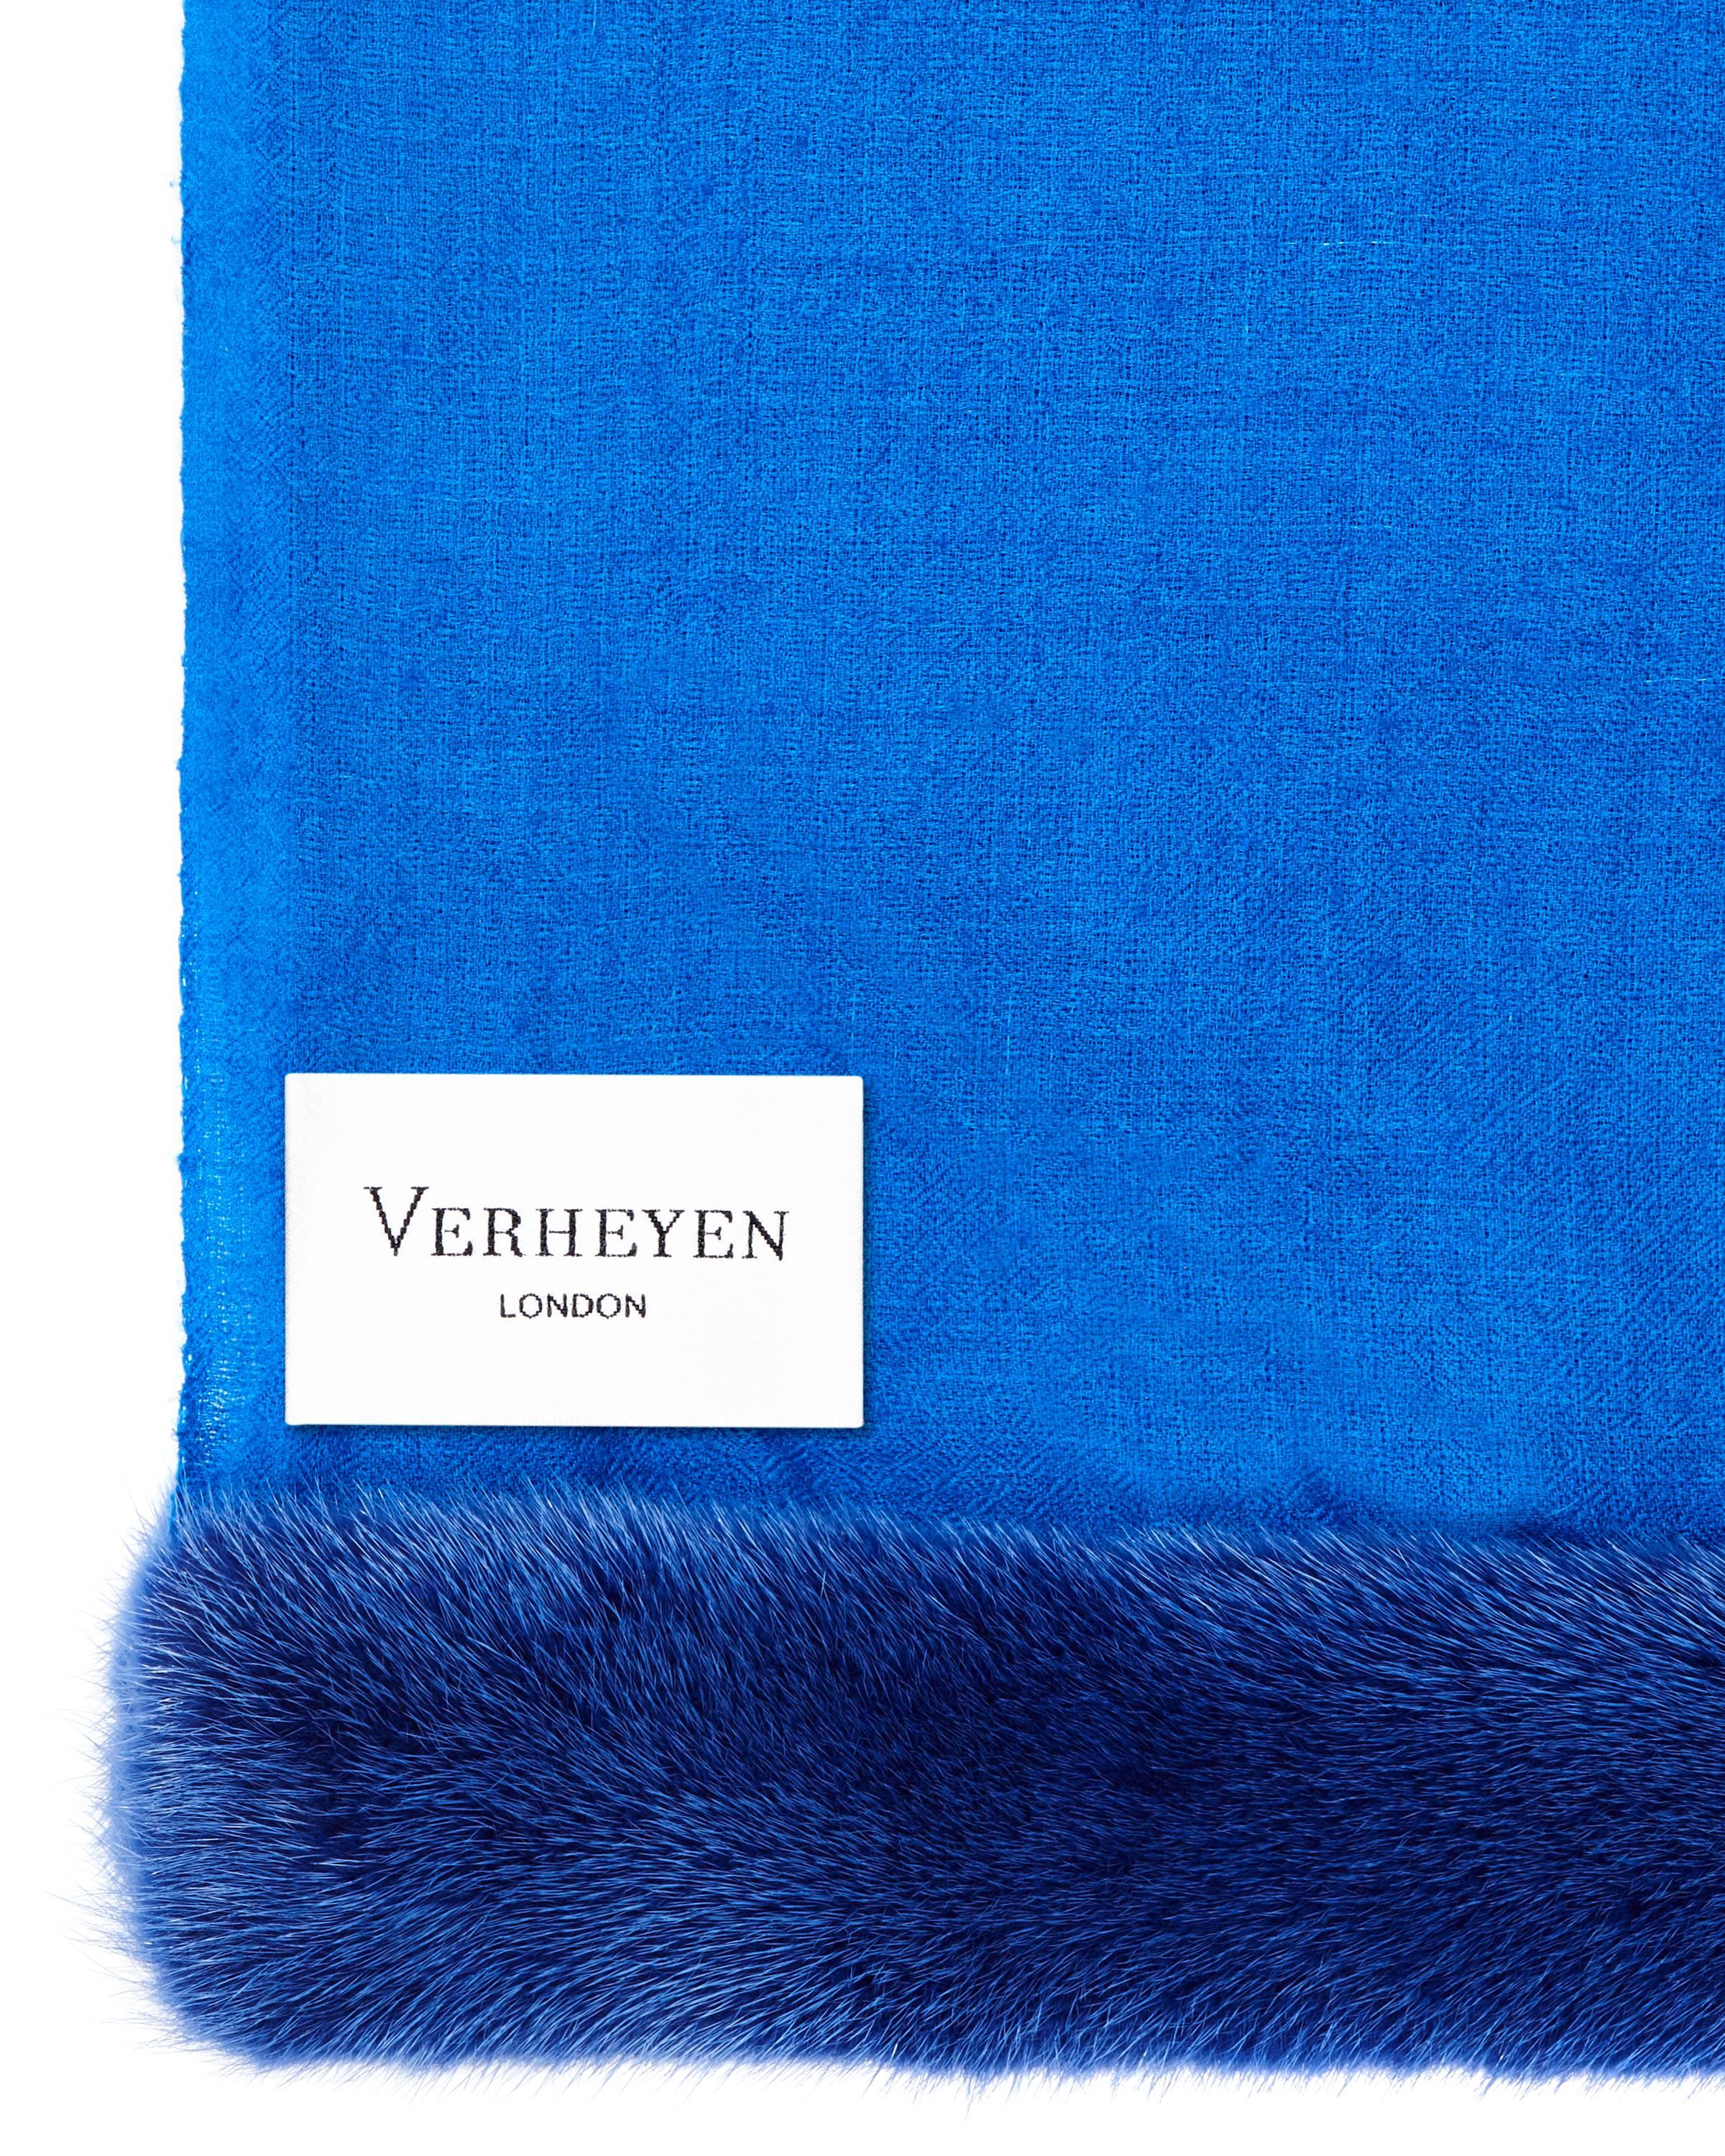 Verheyen London Handwoven Mink Fur Trimmed Cashmere Shawl Scarf in Blue

Verheyen London’s shawl is spun from the finest lightweight handwoven cashmere from Kashmir and finished with the most exquisite dyed mink. Its warmth envelopes you with